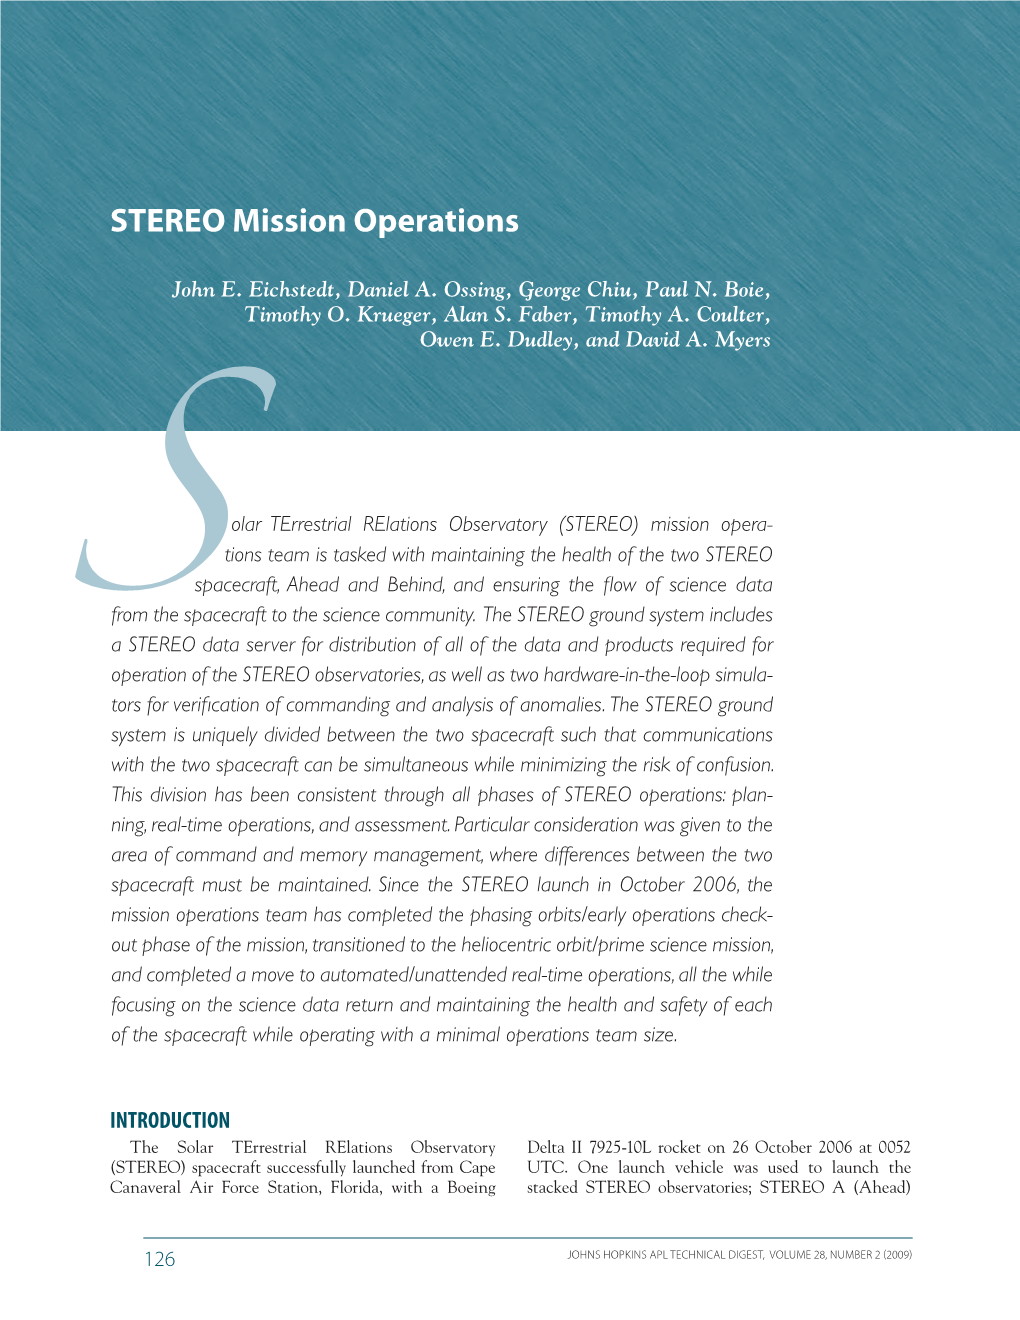 STEREO Mission Operations